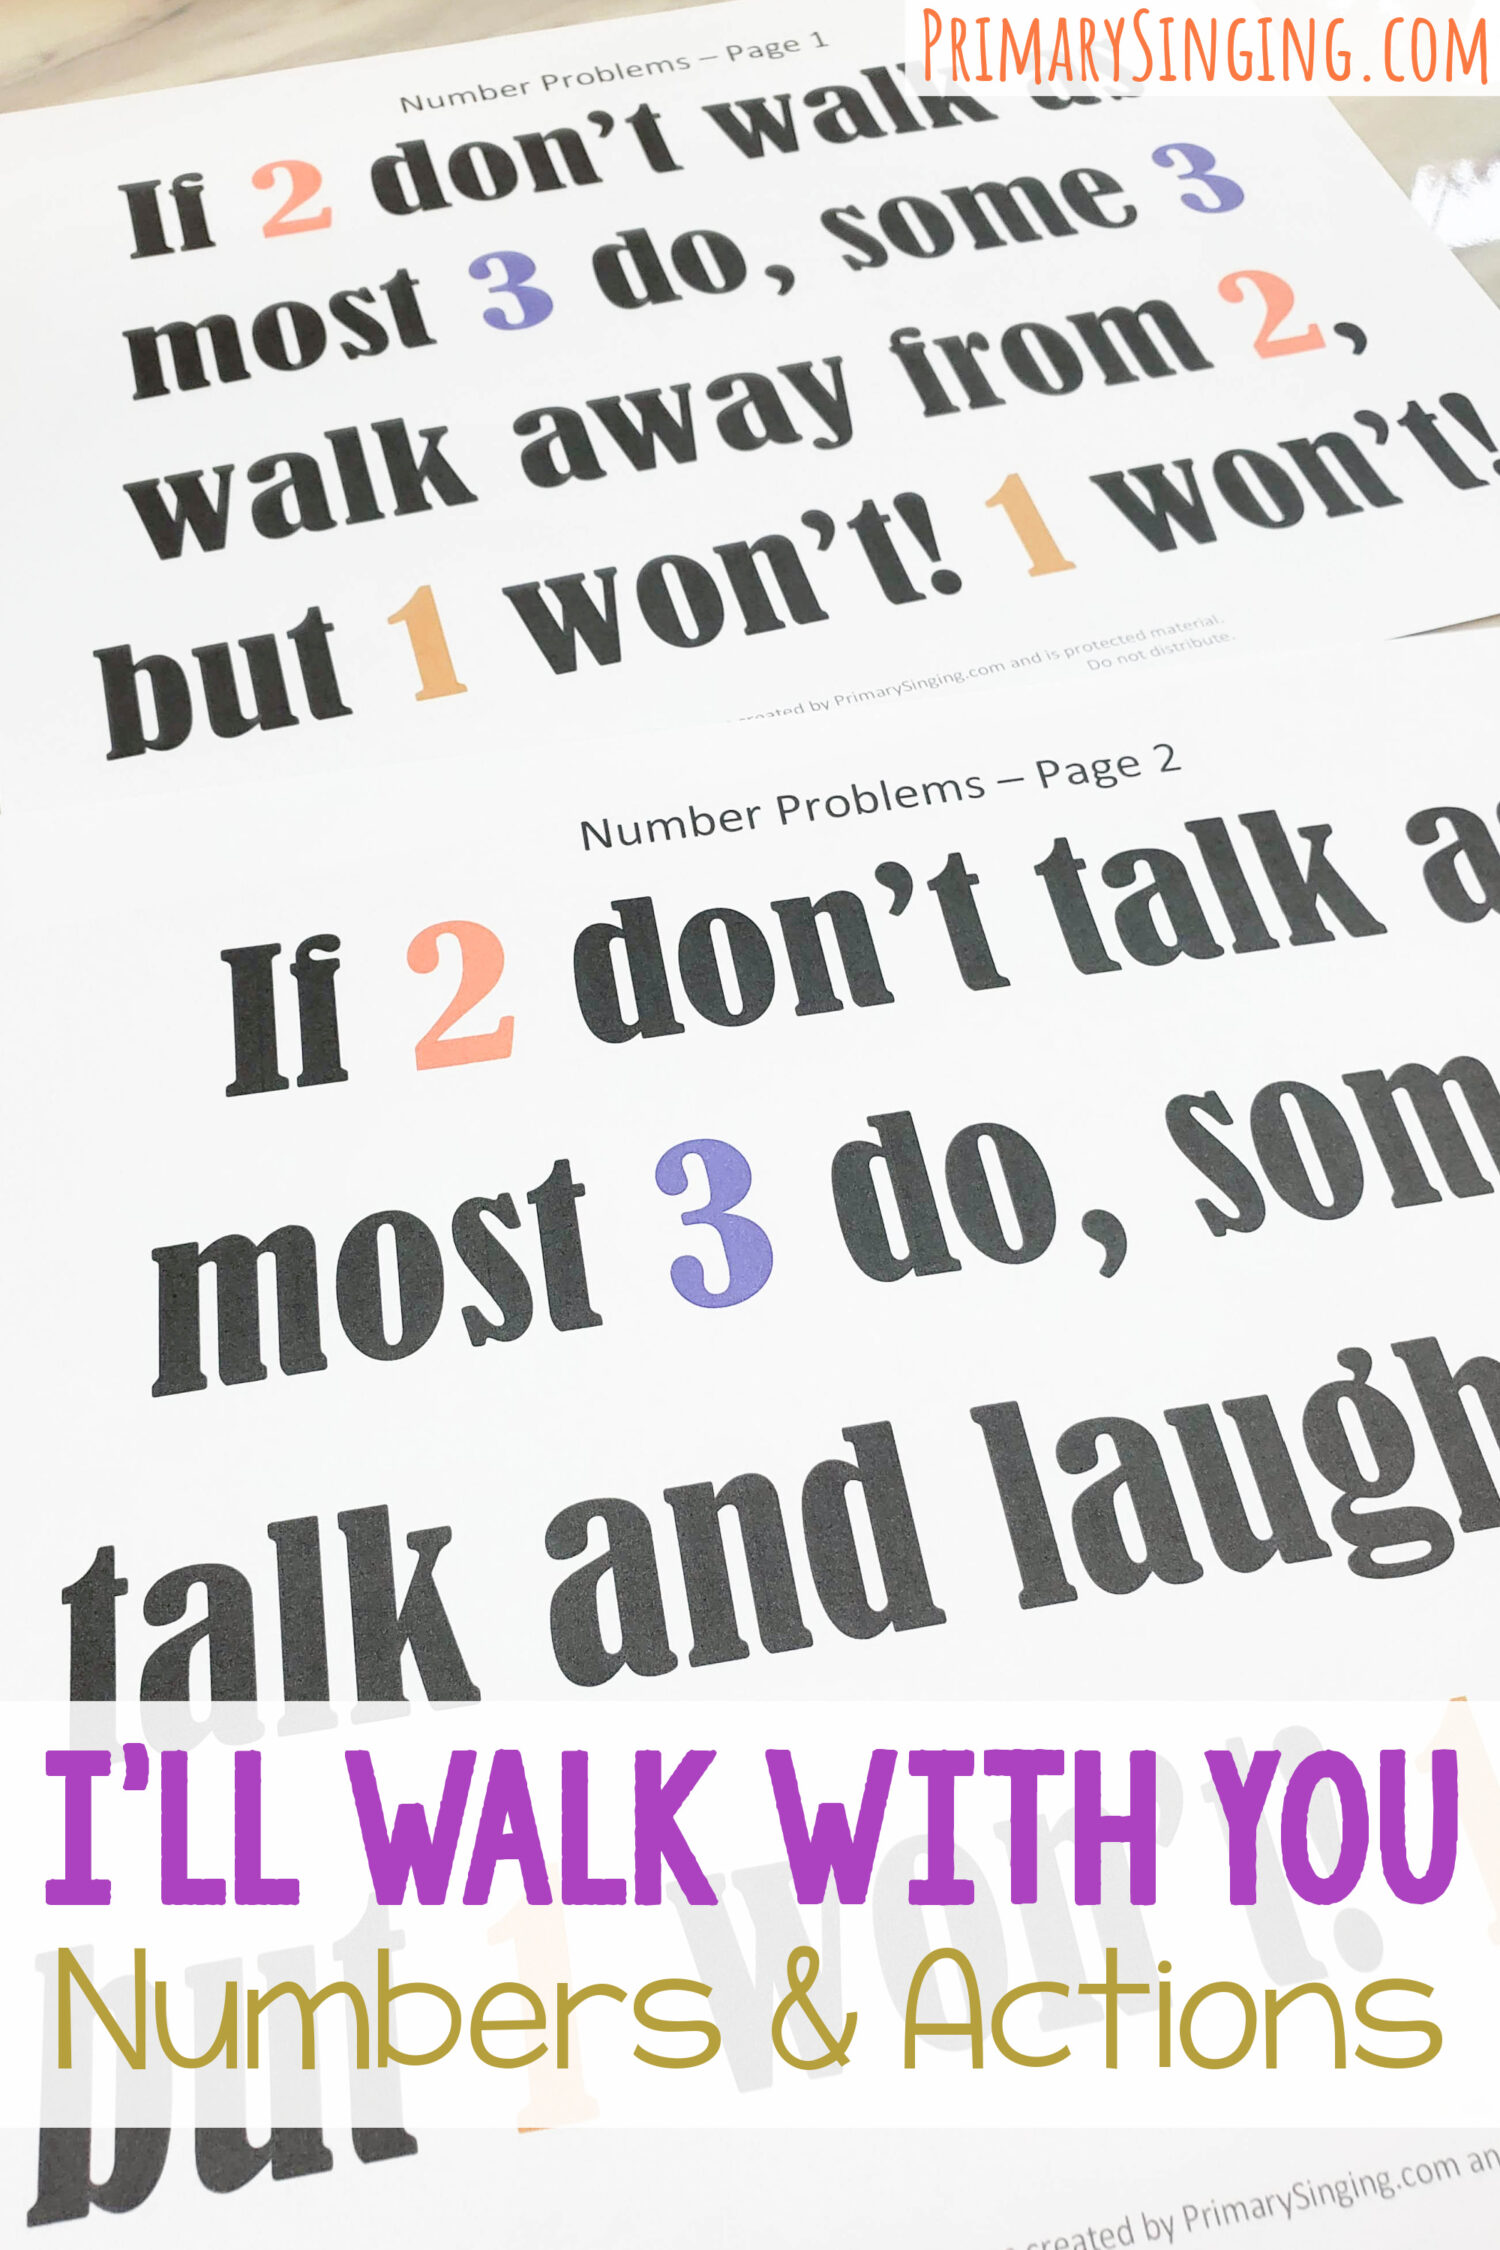 I'll Walk with You Numbers and Actions singing time activity for LDS Primary Music Leaders teaching this song as part of the Come Follow Me New Testament song picks! You'll love this number representation of several keywords that help make learning the song fun and interesting using logic learning styles.